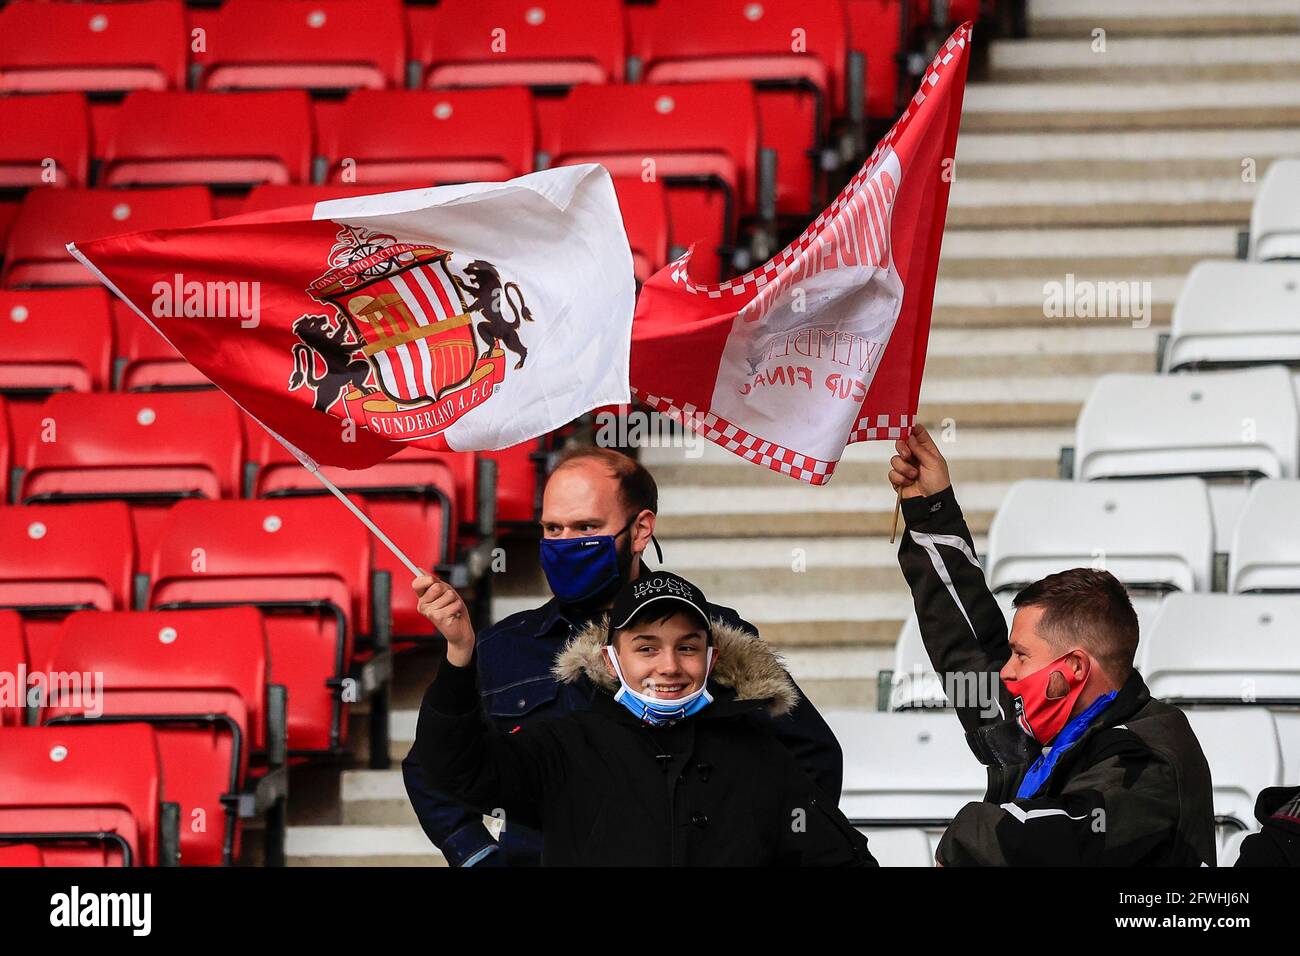 Sunderland, UK. 22nd May, 2021. Two Sunderland fans wave their flags as they enjoy returning to the Stadium of Light after 14 months away due to Covid-19 restrictions in Sunderland, United Kingdom on 5/22/2021. (Photo by Iam Burn/News Images/Sipa USA) Credit: Sipa USA/Alamy Live News Stock Photo